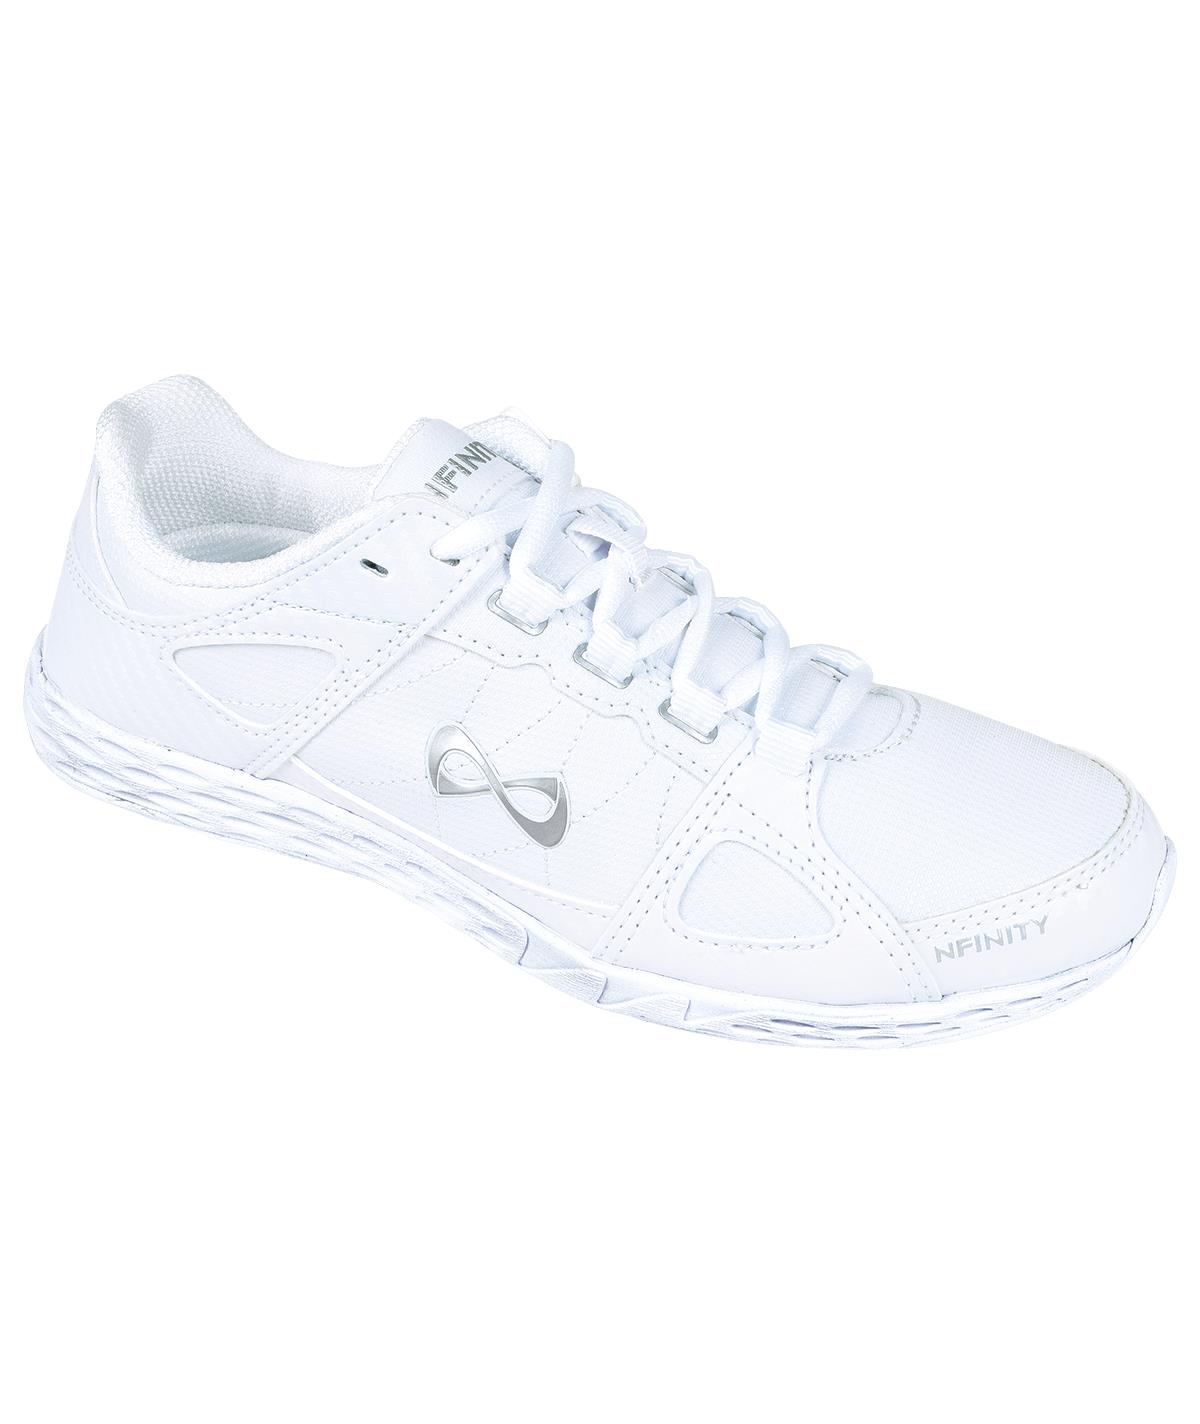 leather cheer shoes